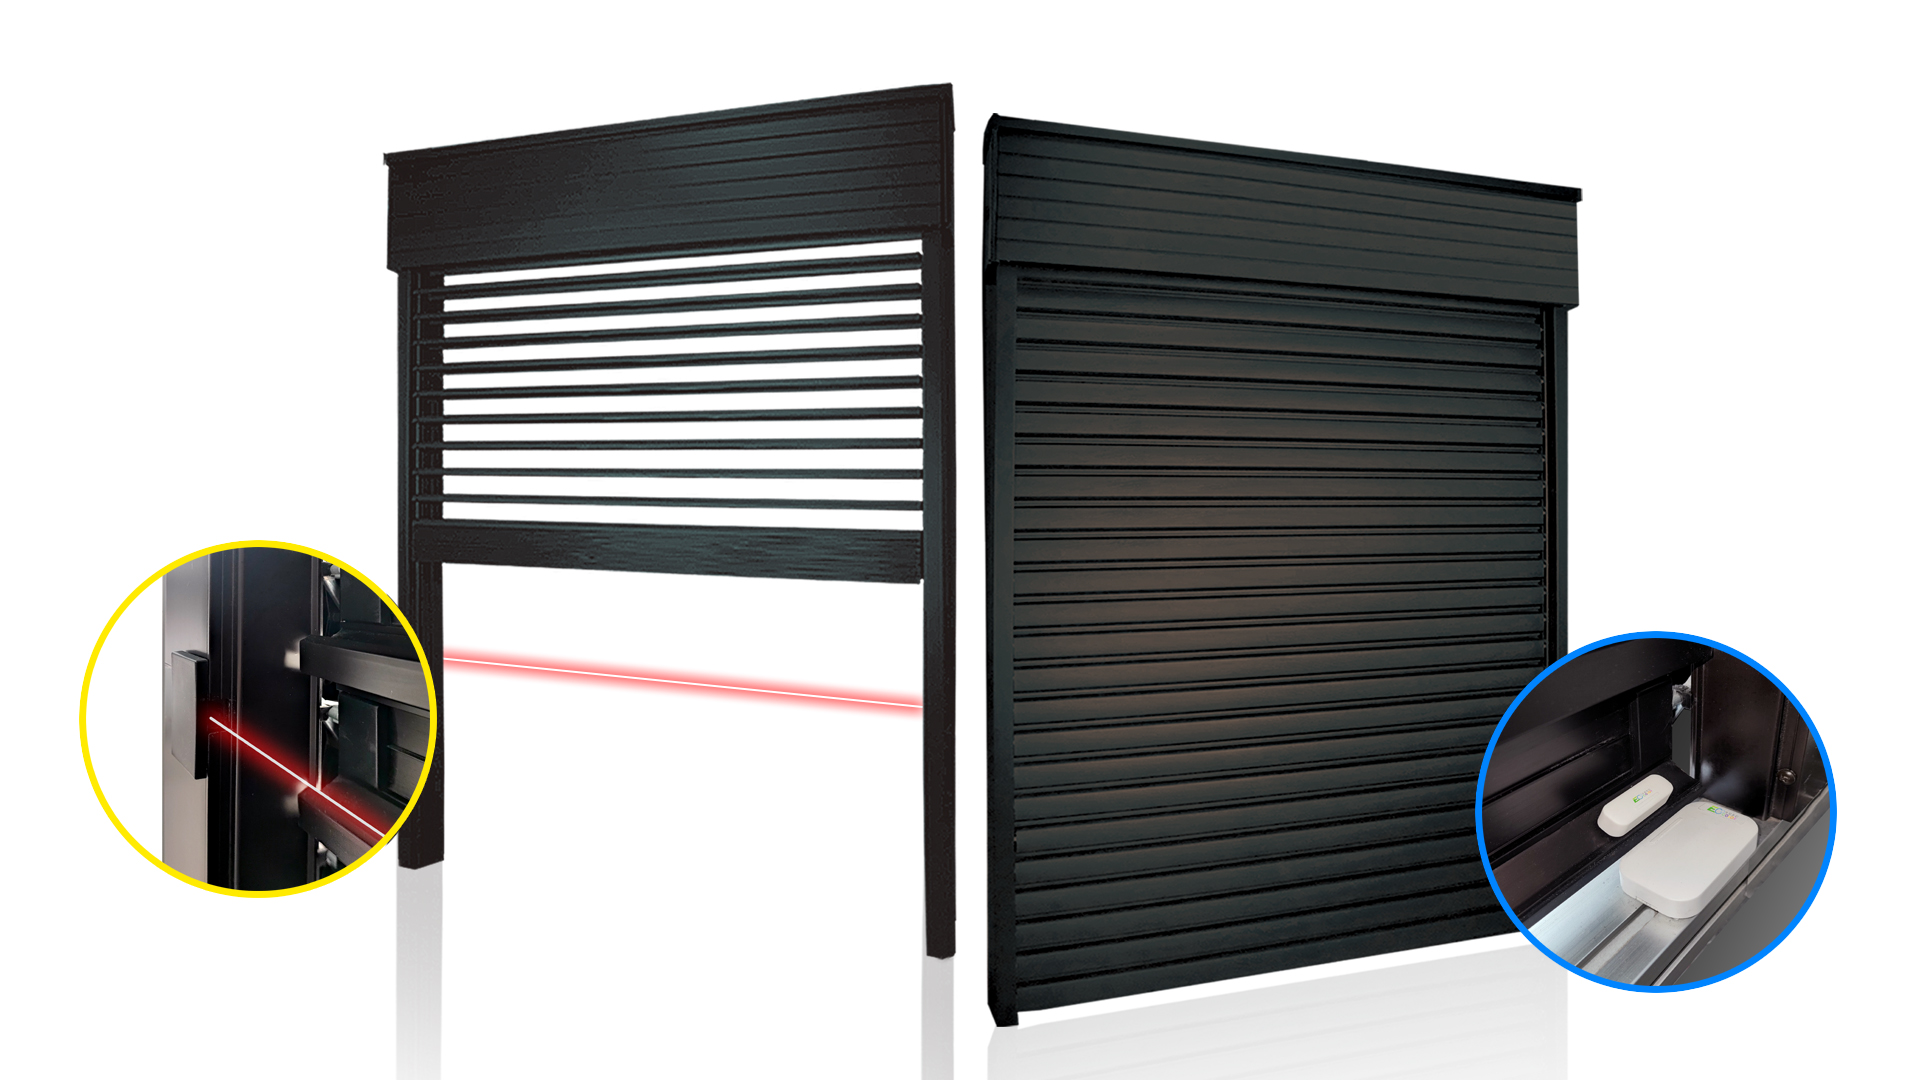 Smart louver anti-theft system